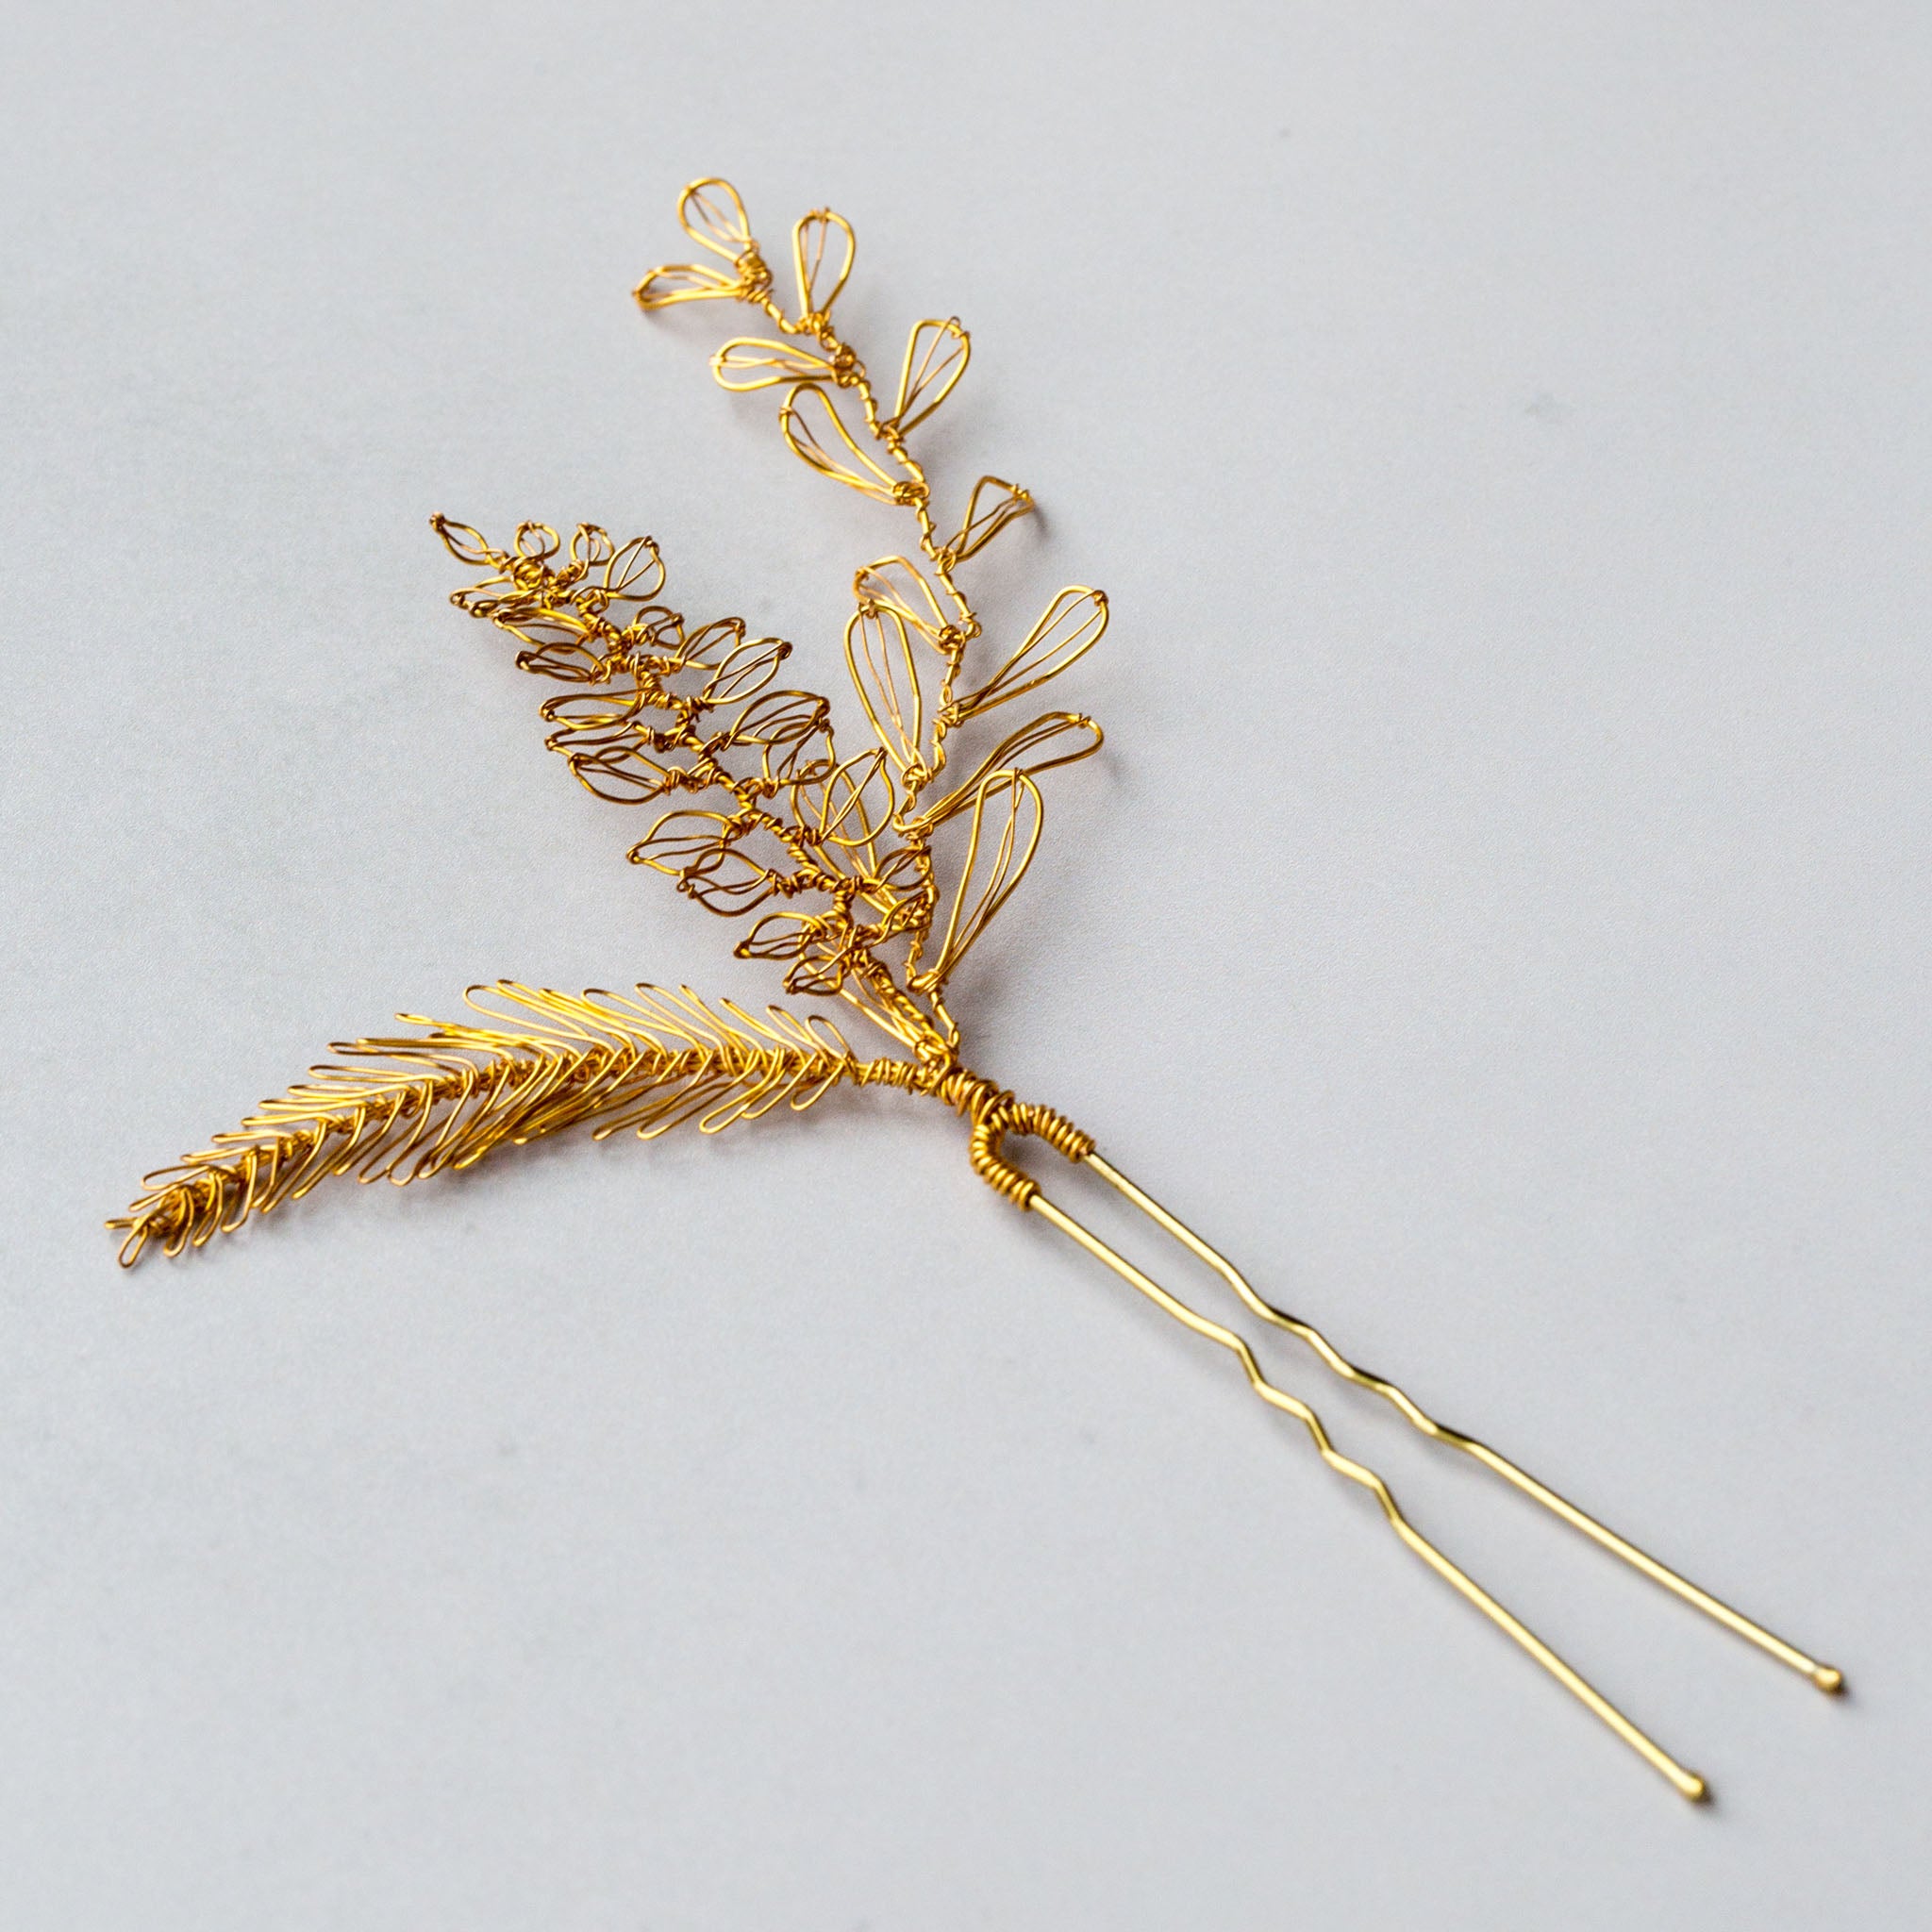 Gold nature inspired hair pin by Judith Brown Bridal